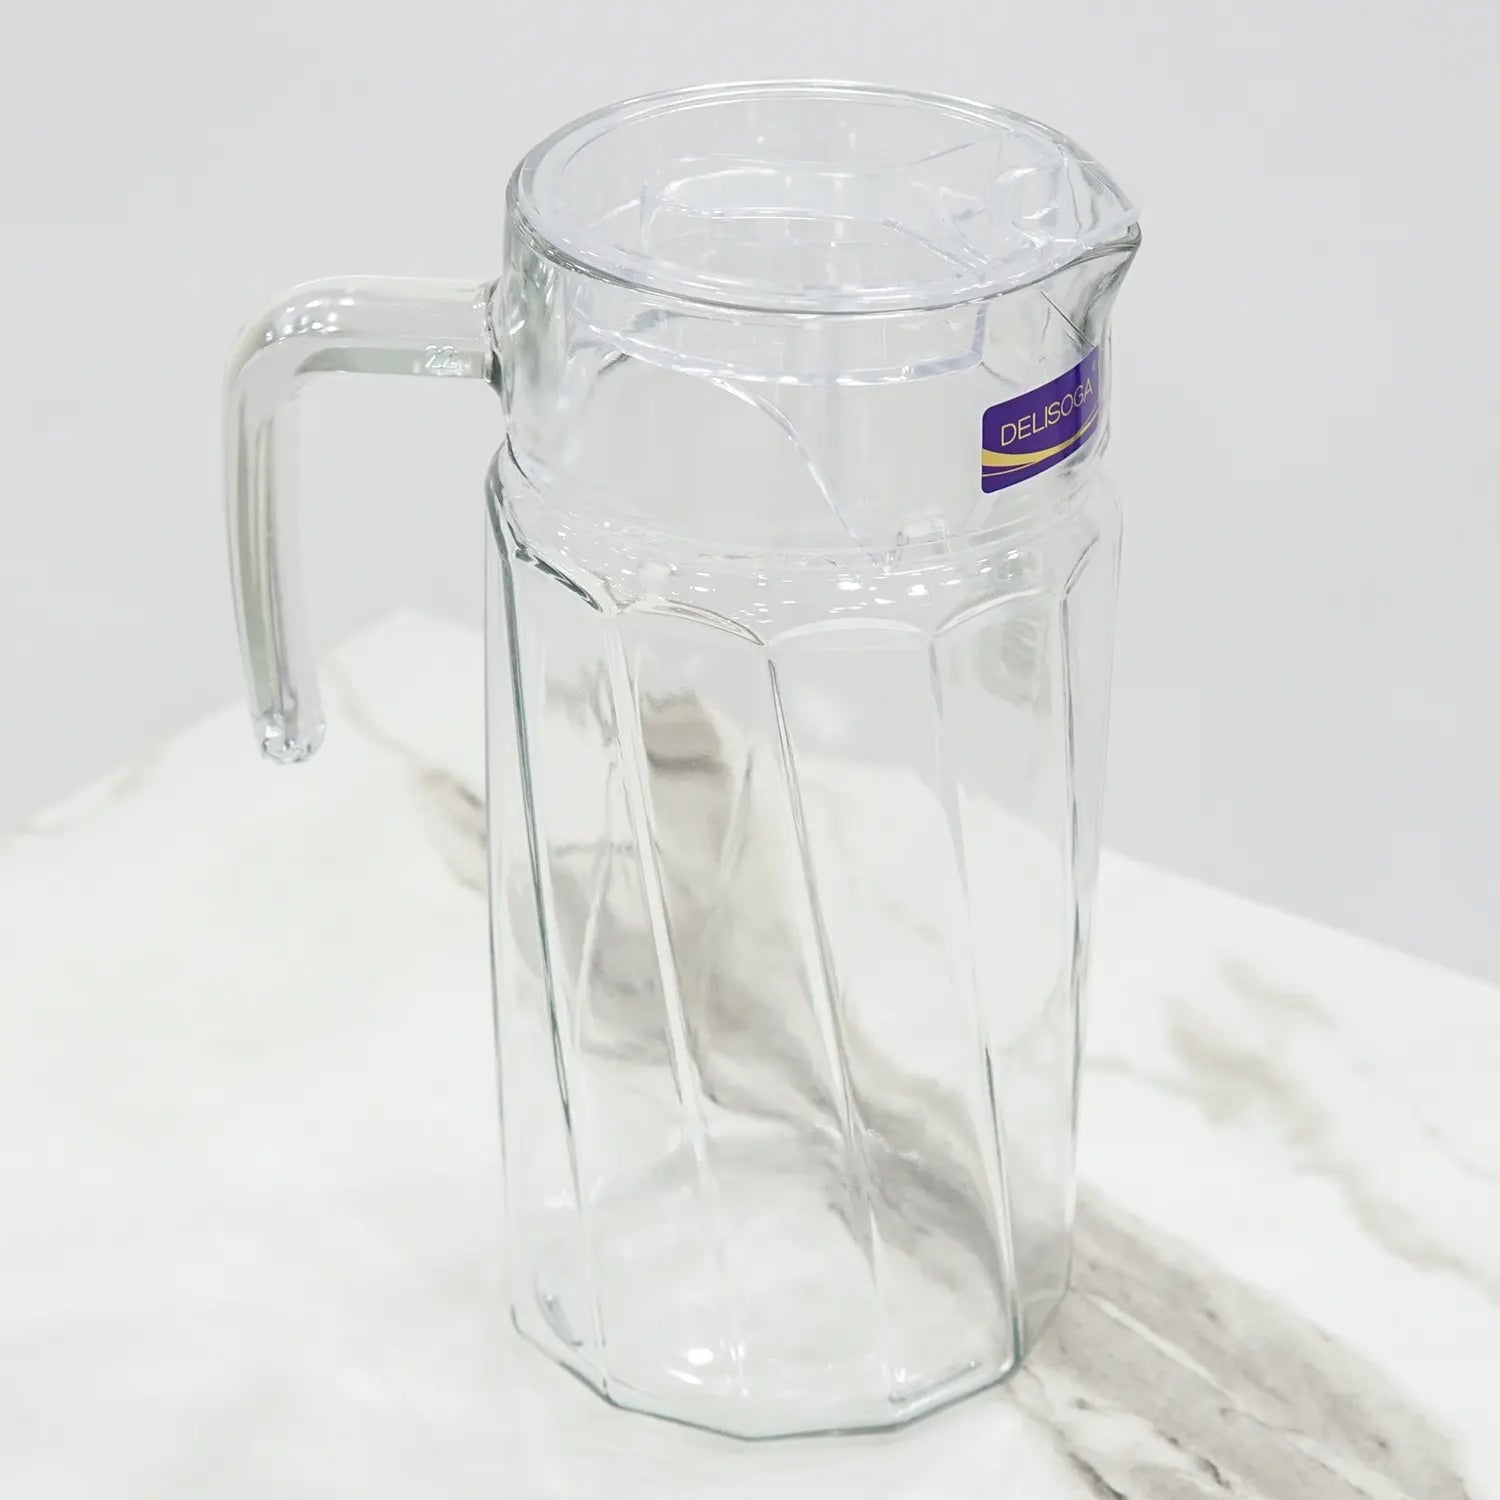 Elegance Unleashed: High-Quality Glass Pitcher for Stylish Serving